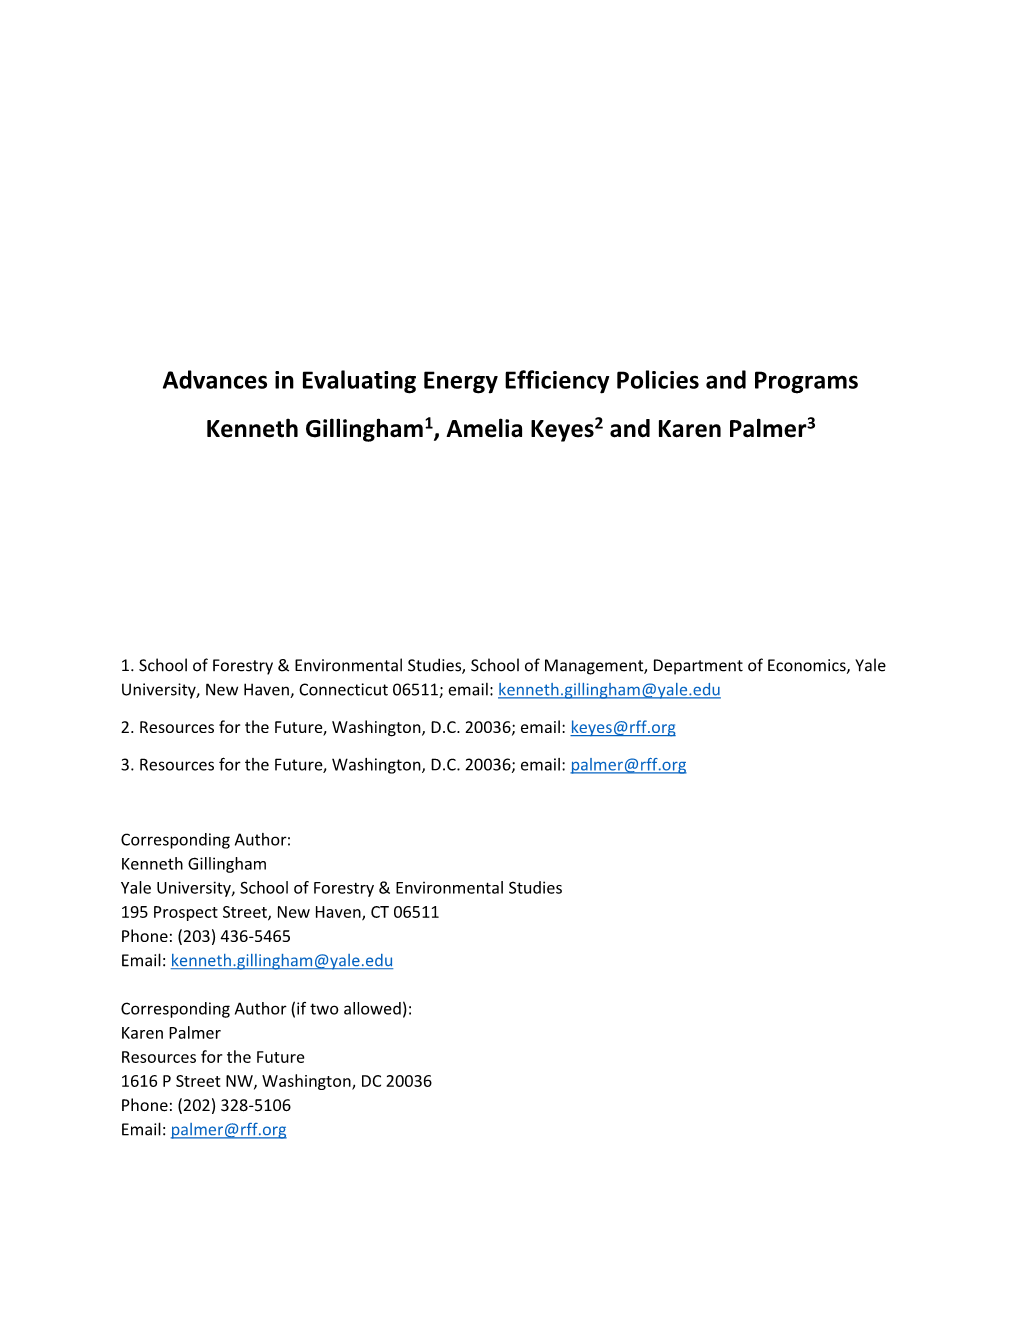 Advances in Evaluating Energy Efficiency Policies and Programs Kenneth Gillingham1, Amelia Keyes2 and Karen Palmer3